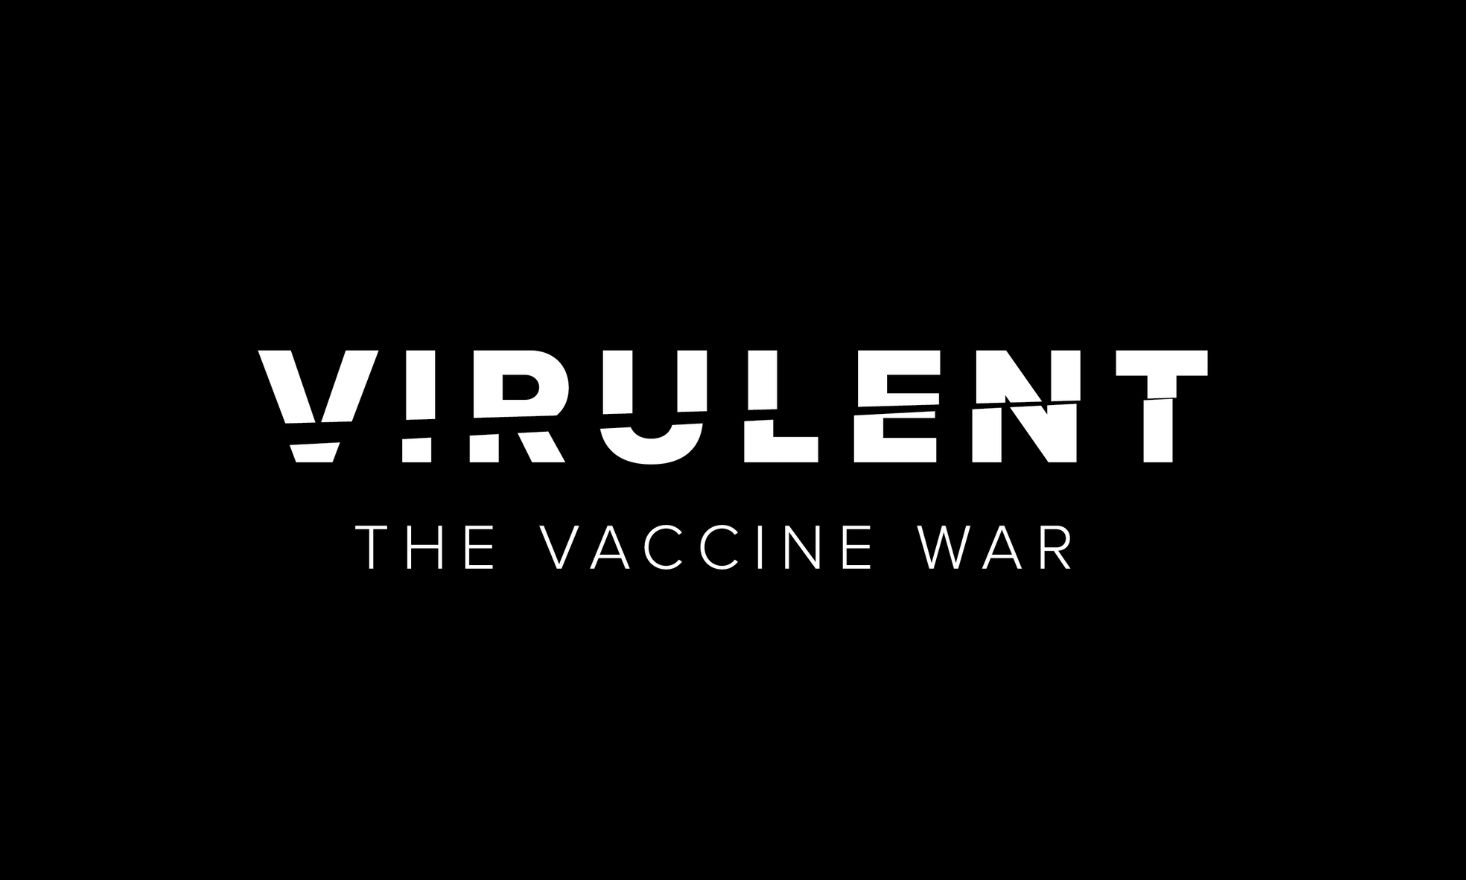 Black background with text "Virulent: The Vaccine War"